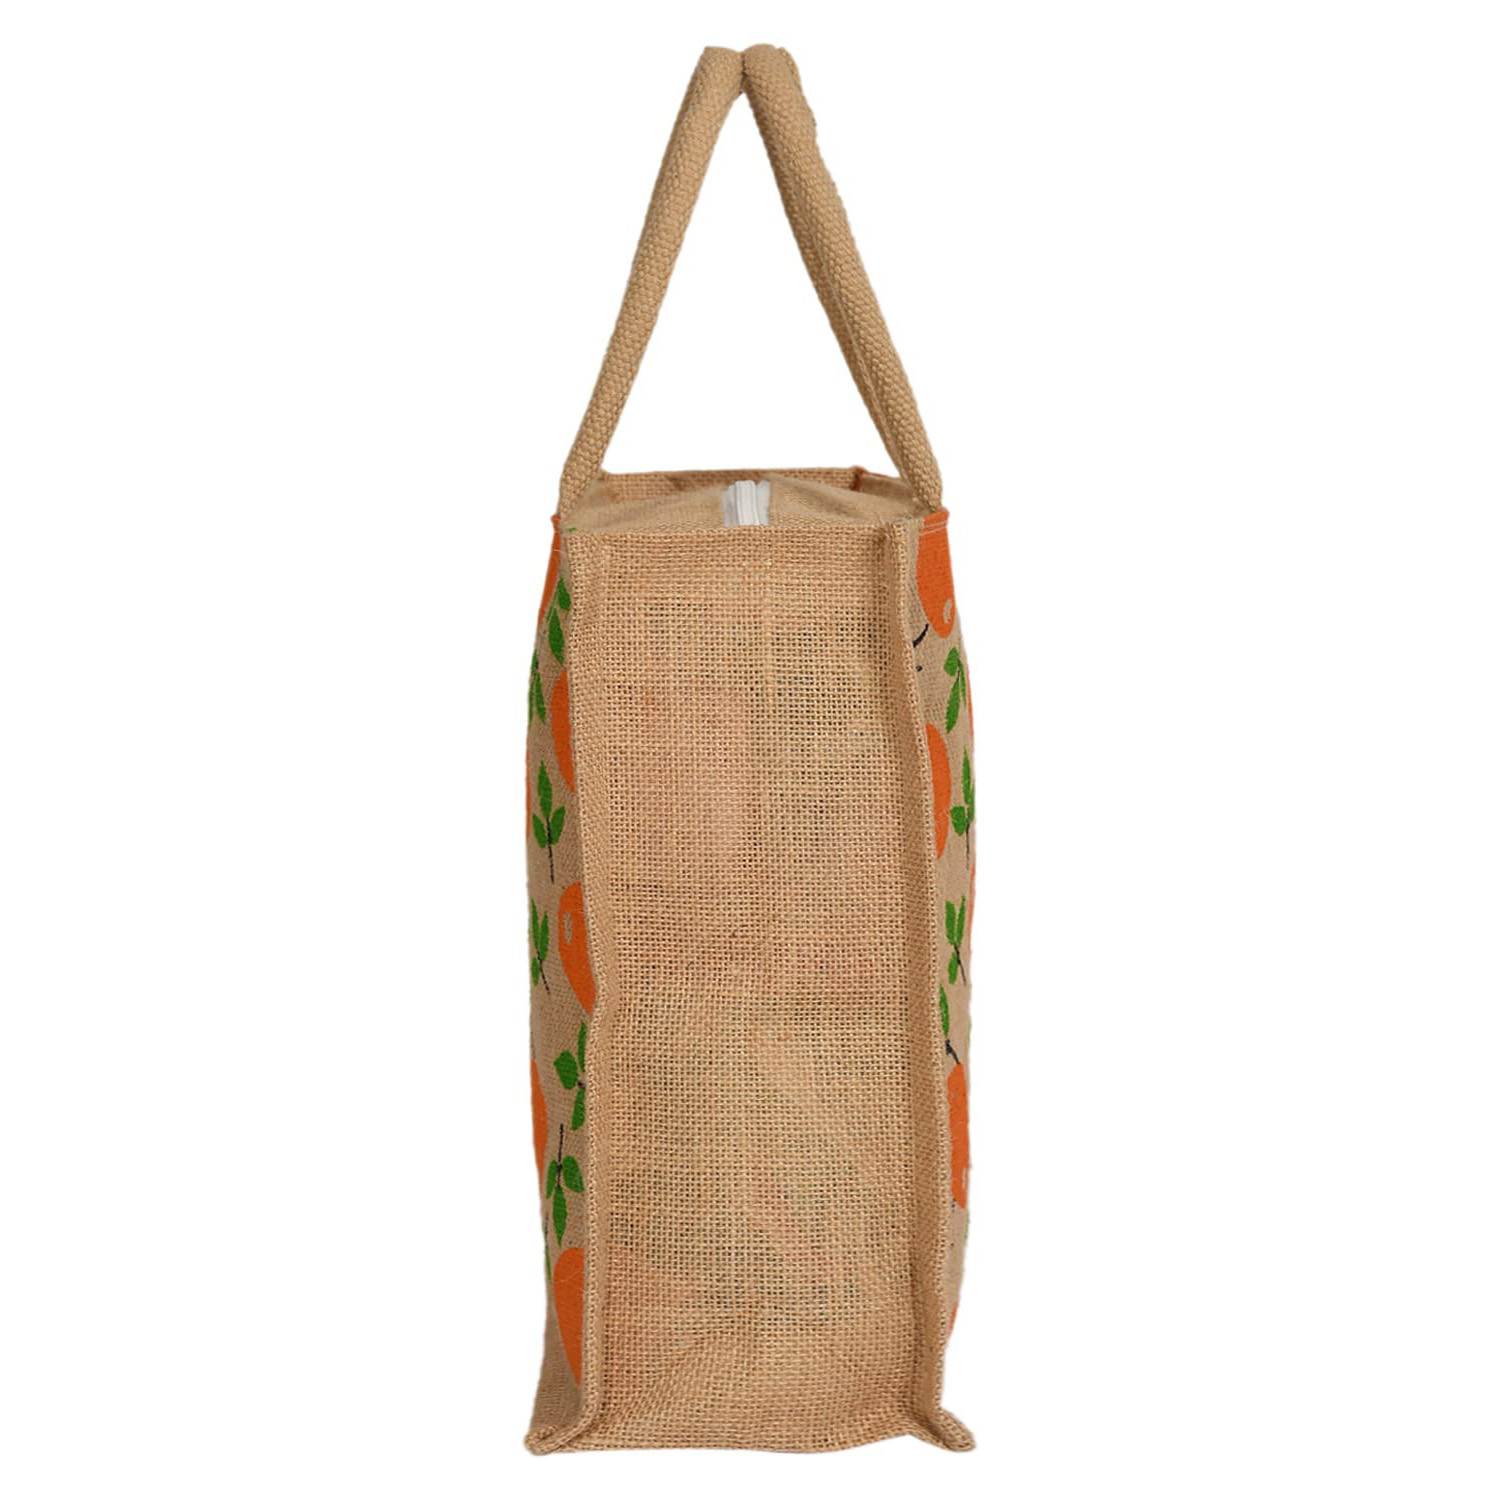 Kuber Industries Shopping Bag|Jute Eco-Friendly & Reusable Grocery Bag|Hand Bag With Zip & Handle for Daily Use|BROWN